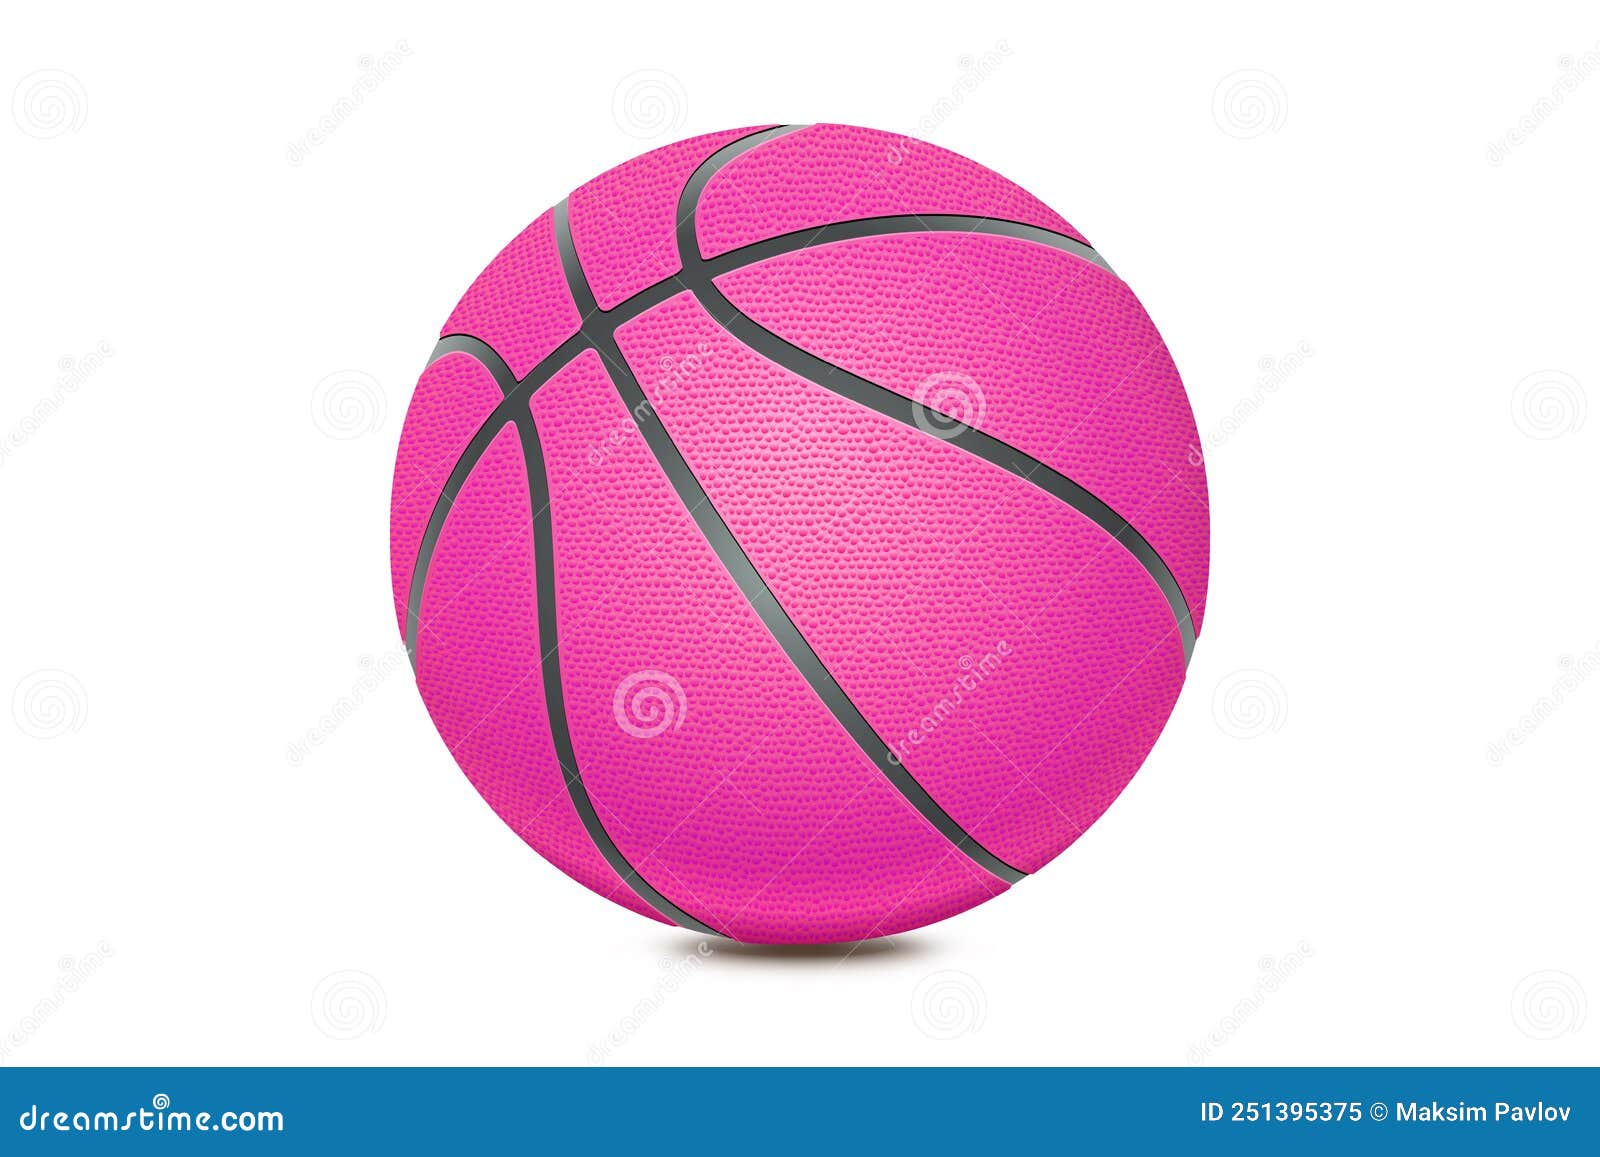 Basketball isolated on white background. Pink ball, sport object concept. New rose basketball with black lines. 3D rendering model.